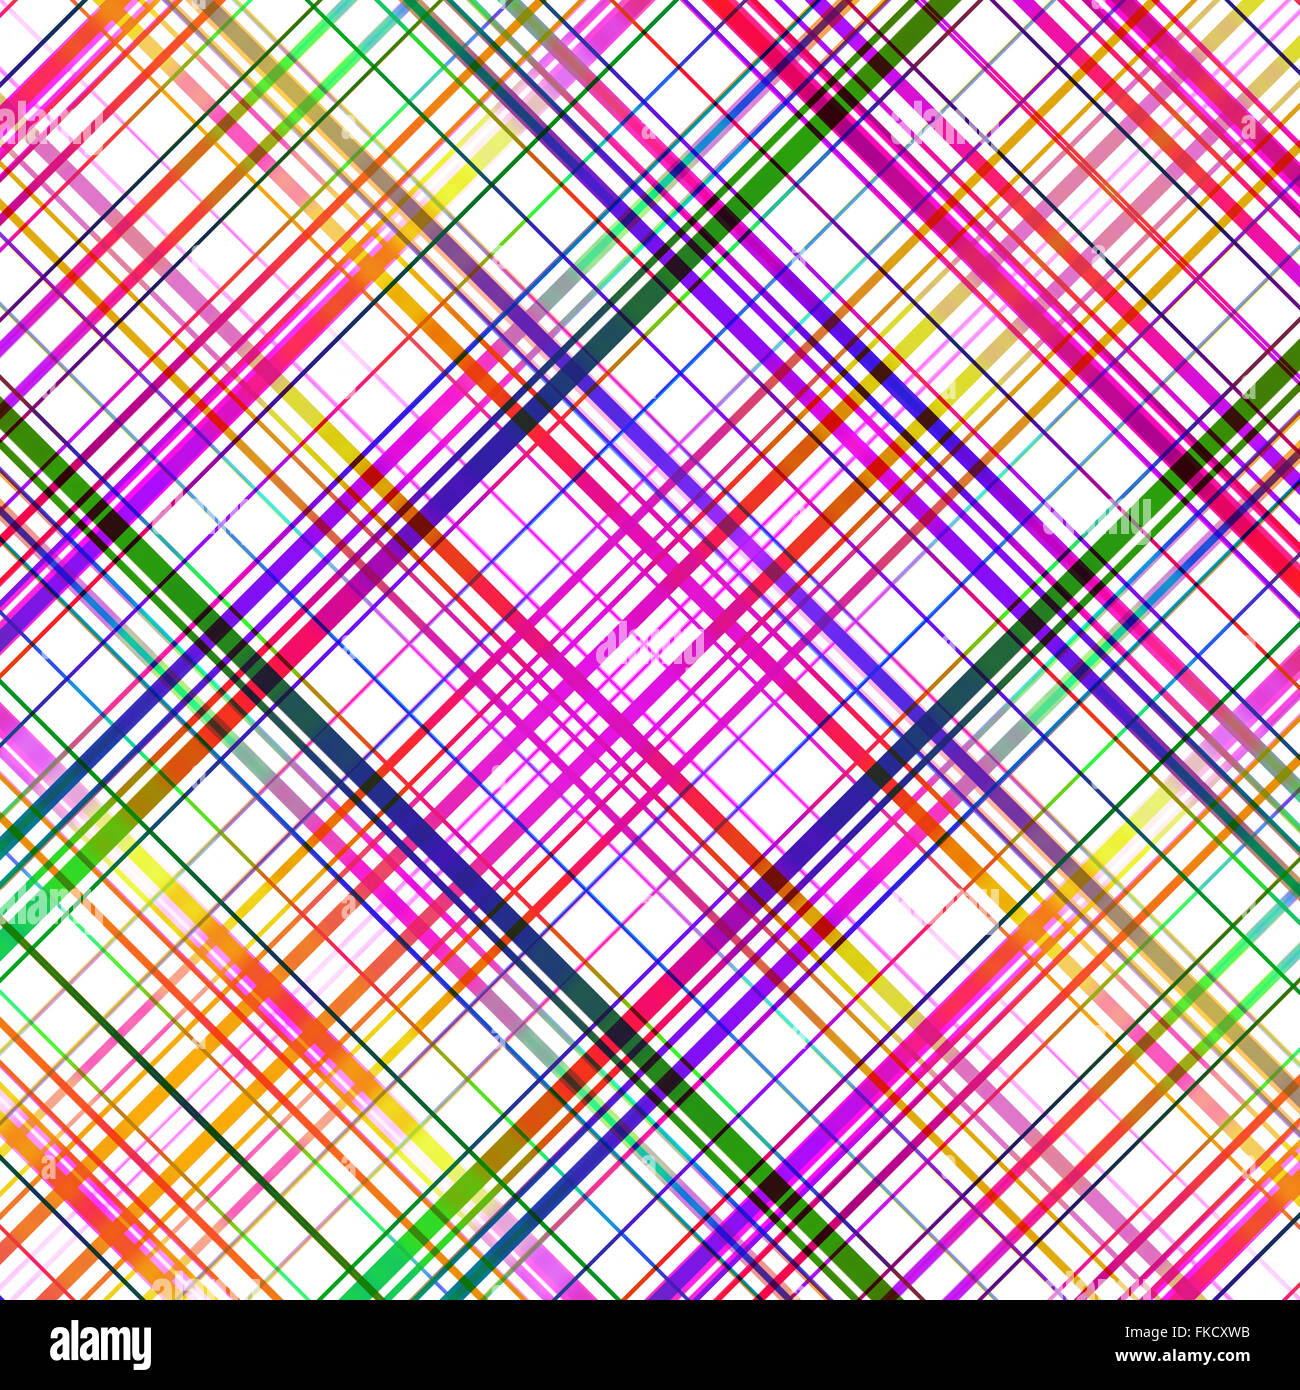 Bright multicoloured diagonal grid lines abstract pattern. Stock Photo